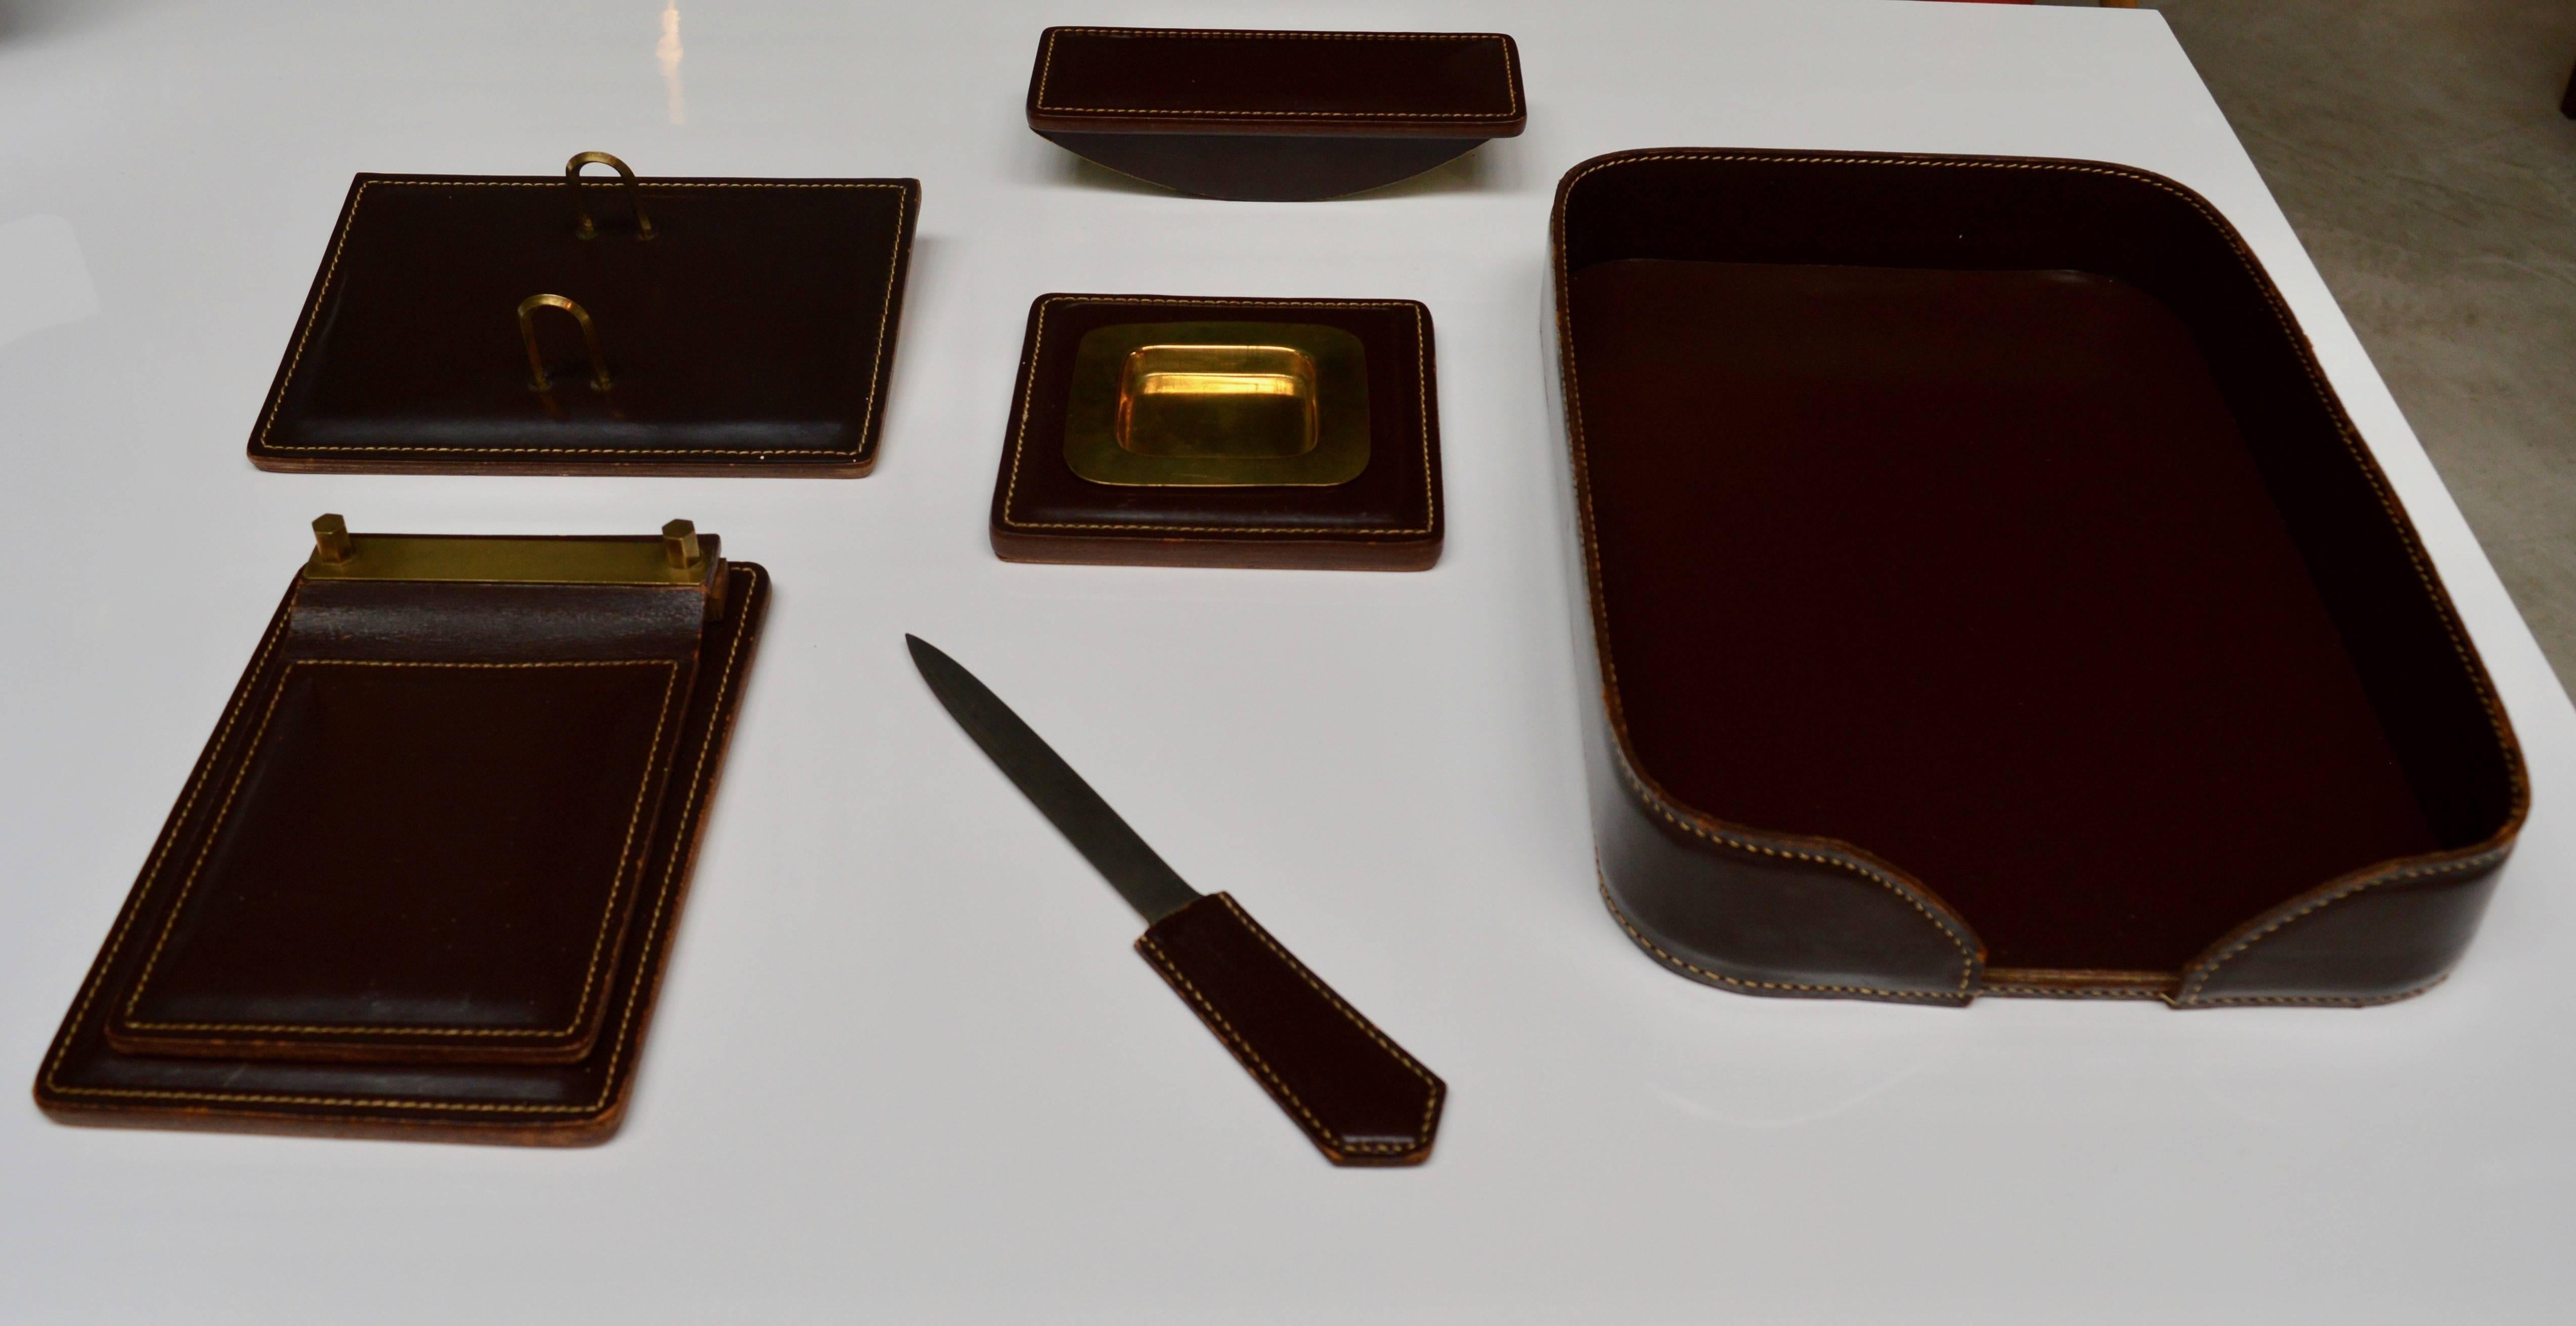 Handsome French leather desk set in the style of Jacques Adnet. Deep brown/burgundy leather with contrast stitching. Six-piece set includes letter tray, letter opener, ashtray/catchall with brass dish, calendar pad, notepad and ink blotter.